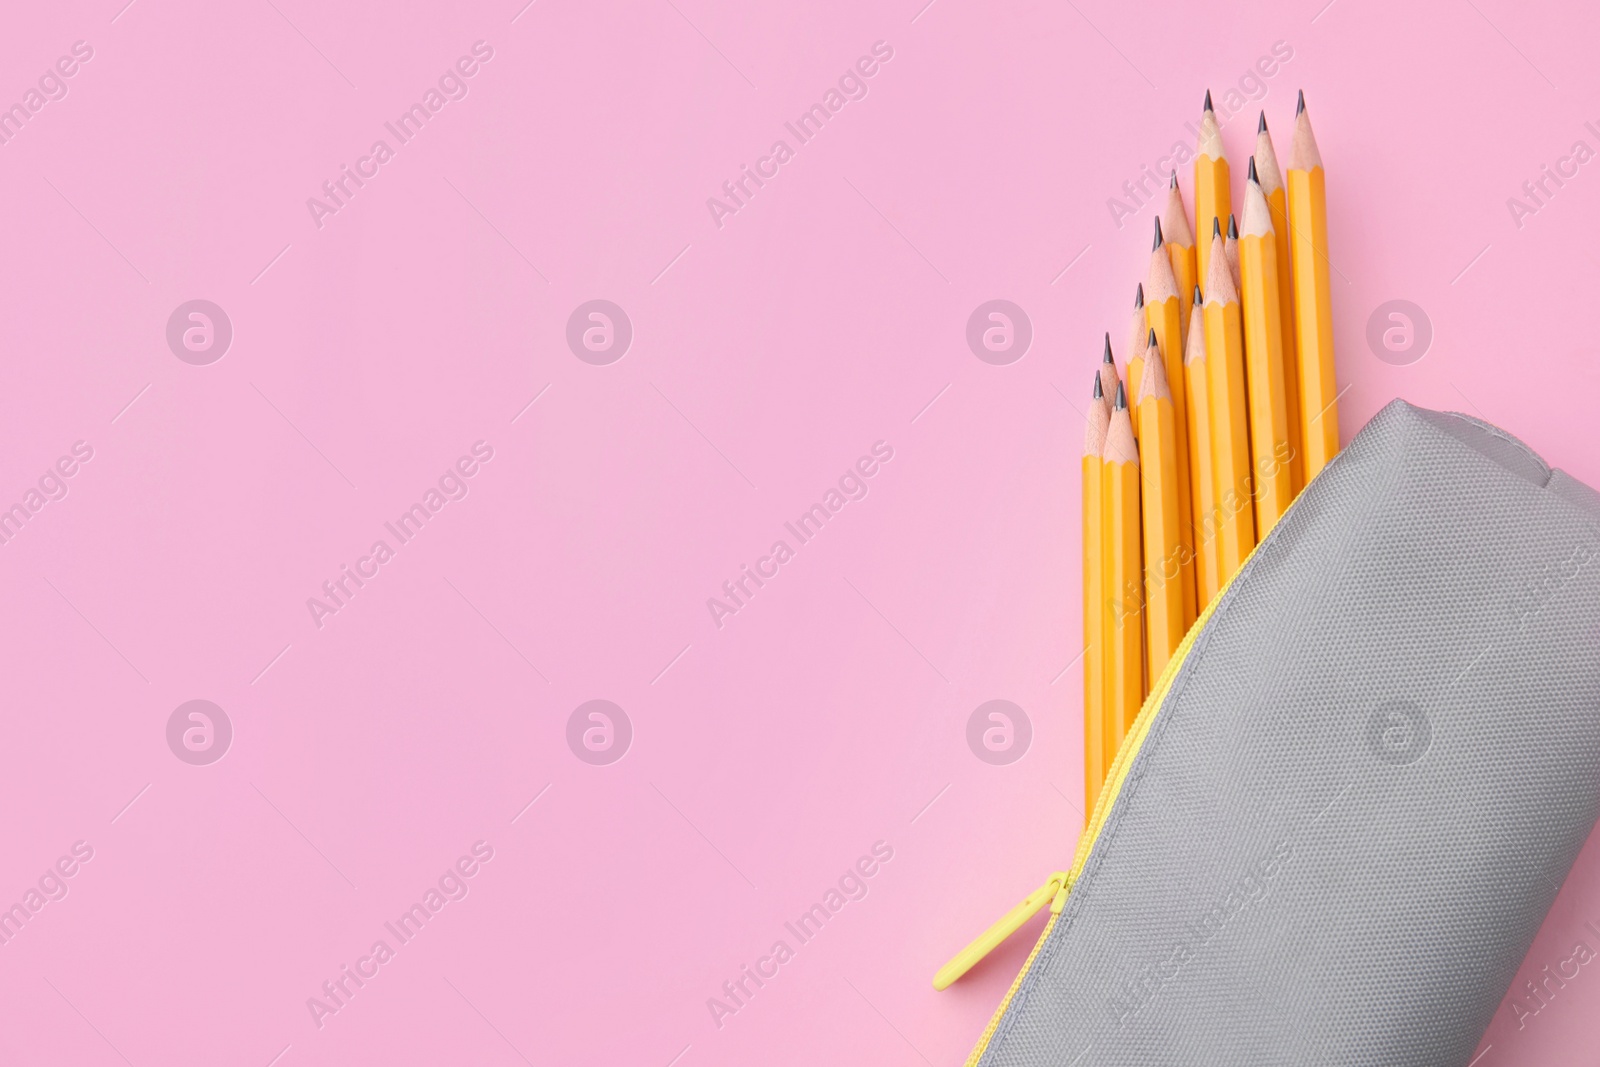 Photo of Many sharp pencils in pencil case on pink background, top view. Space for text